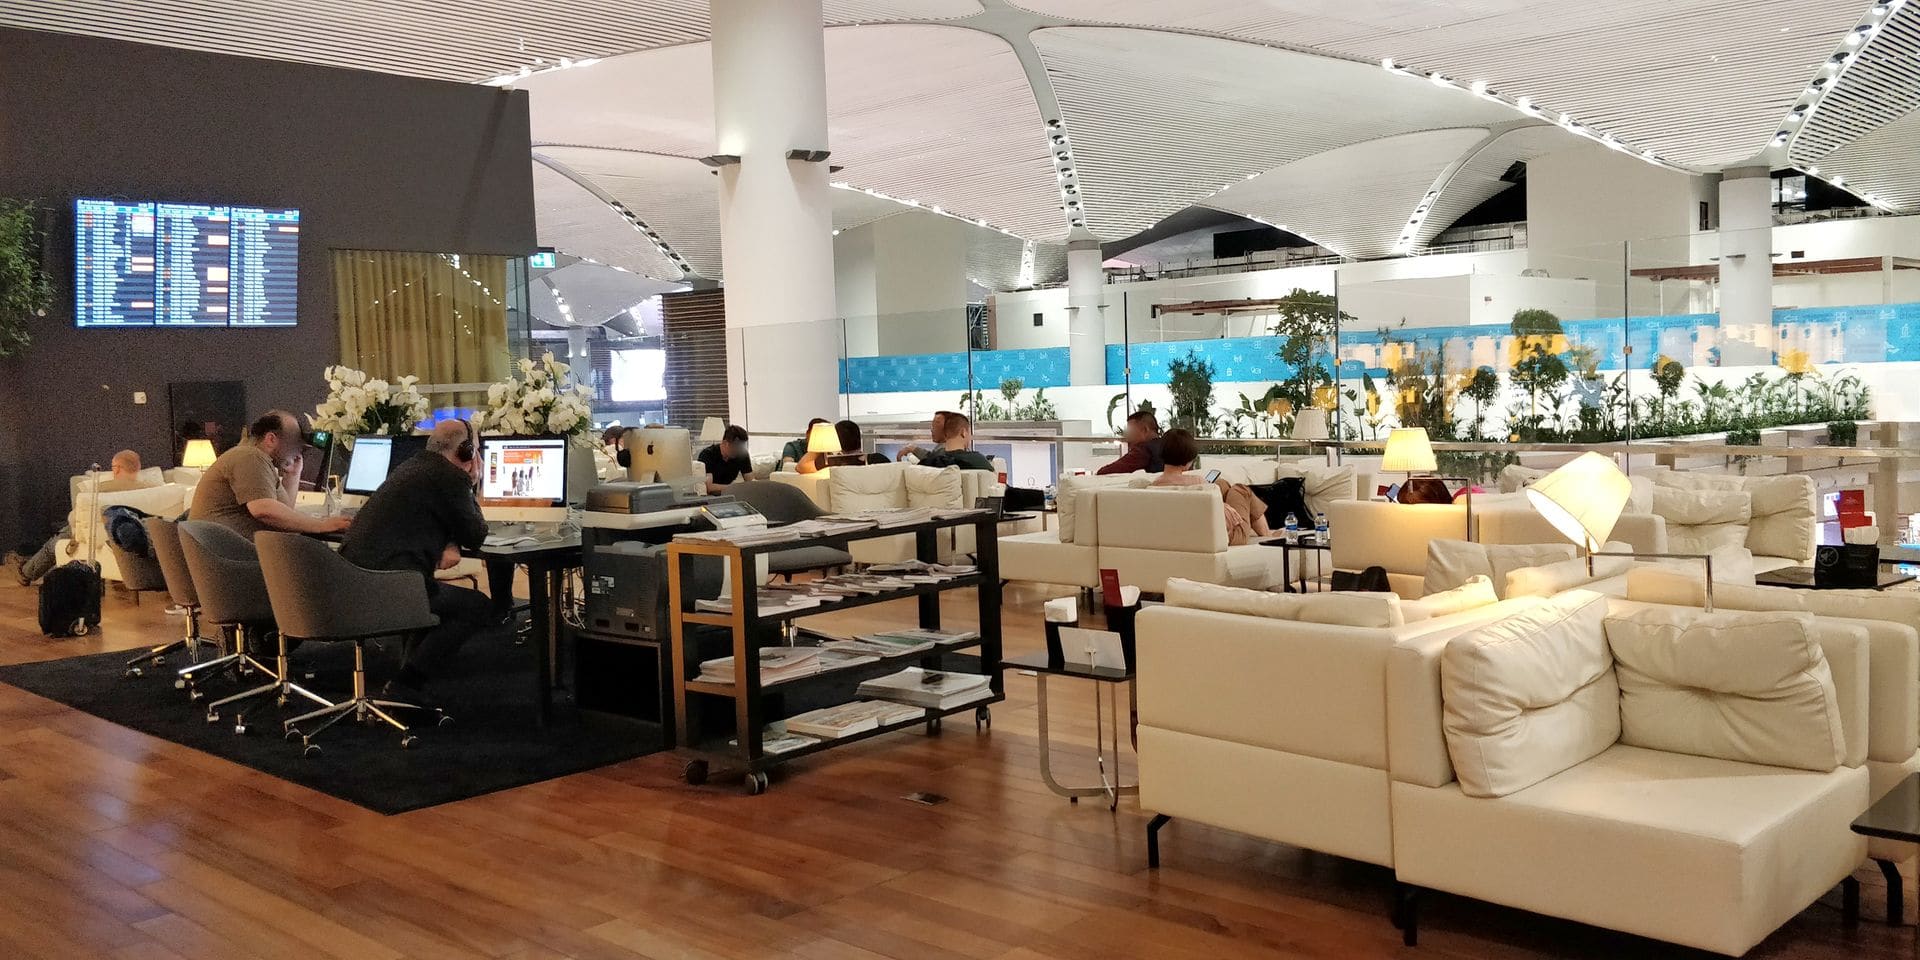 Turkish Airlines Lounge Istanbul Miles Smiles Business Center